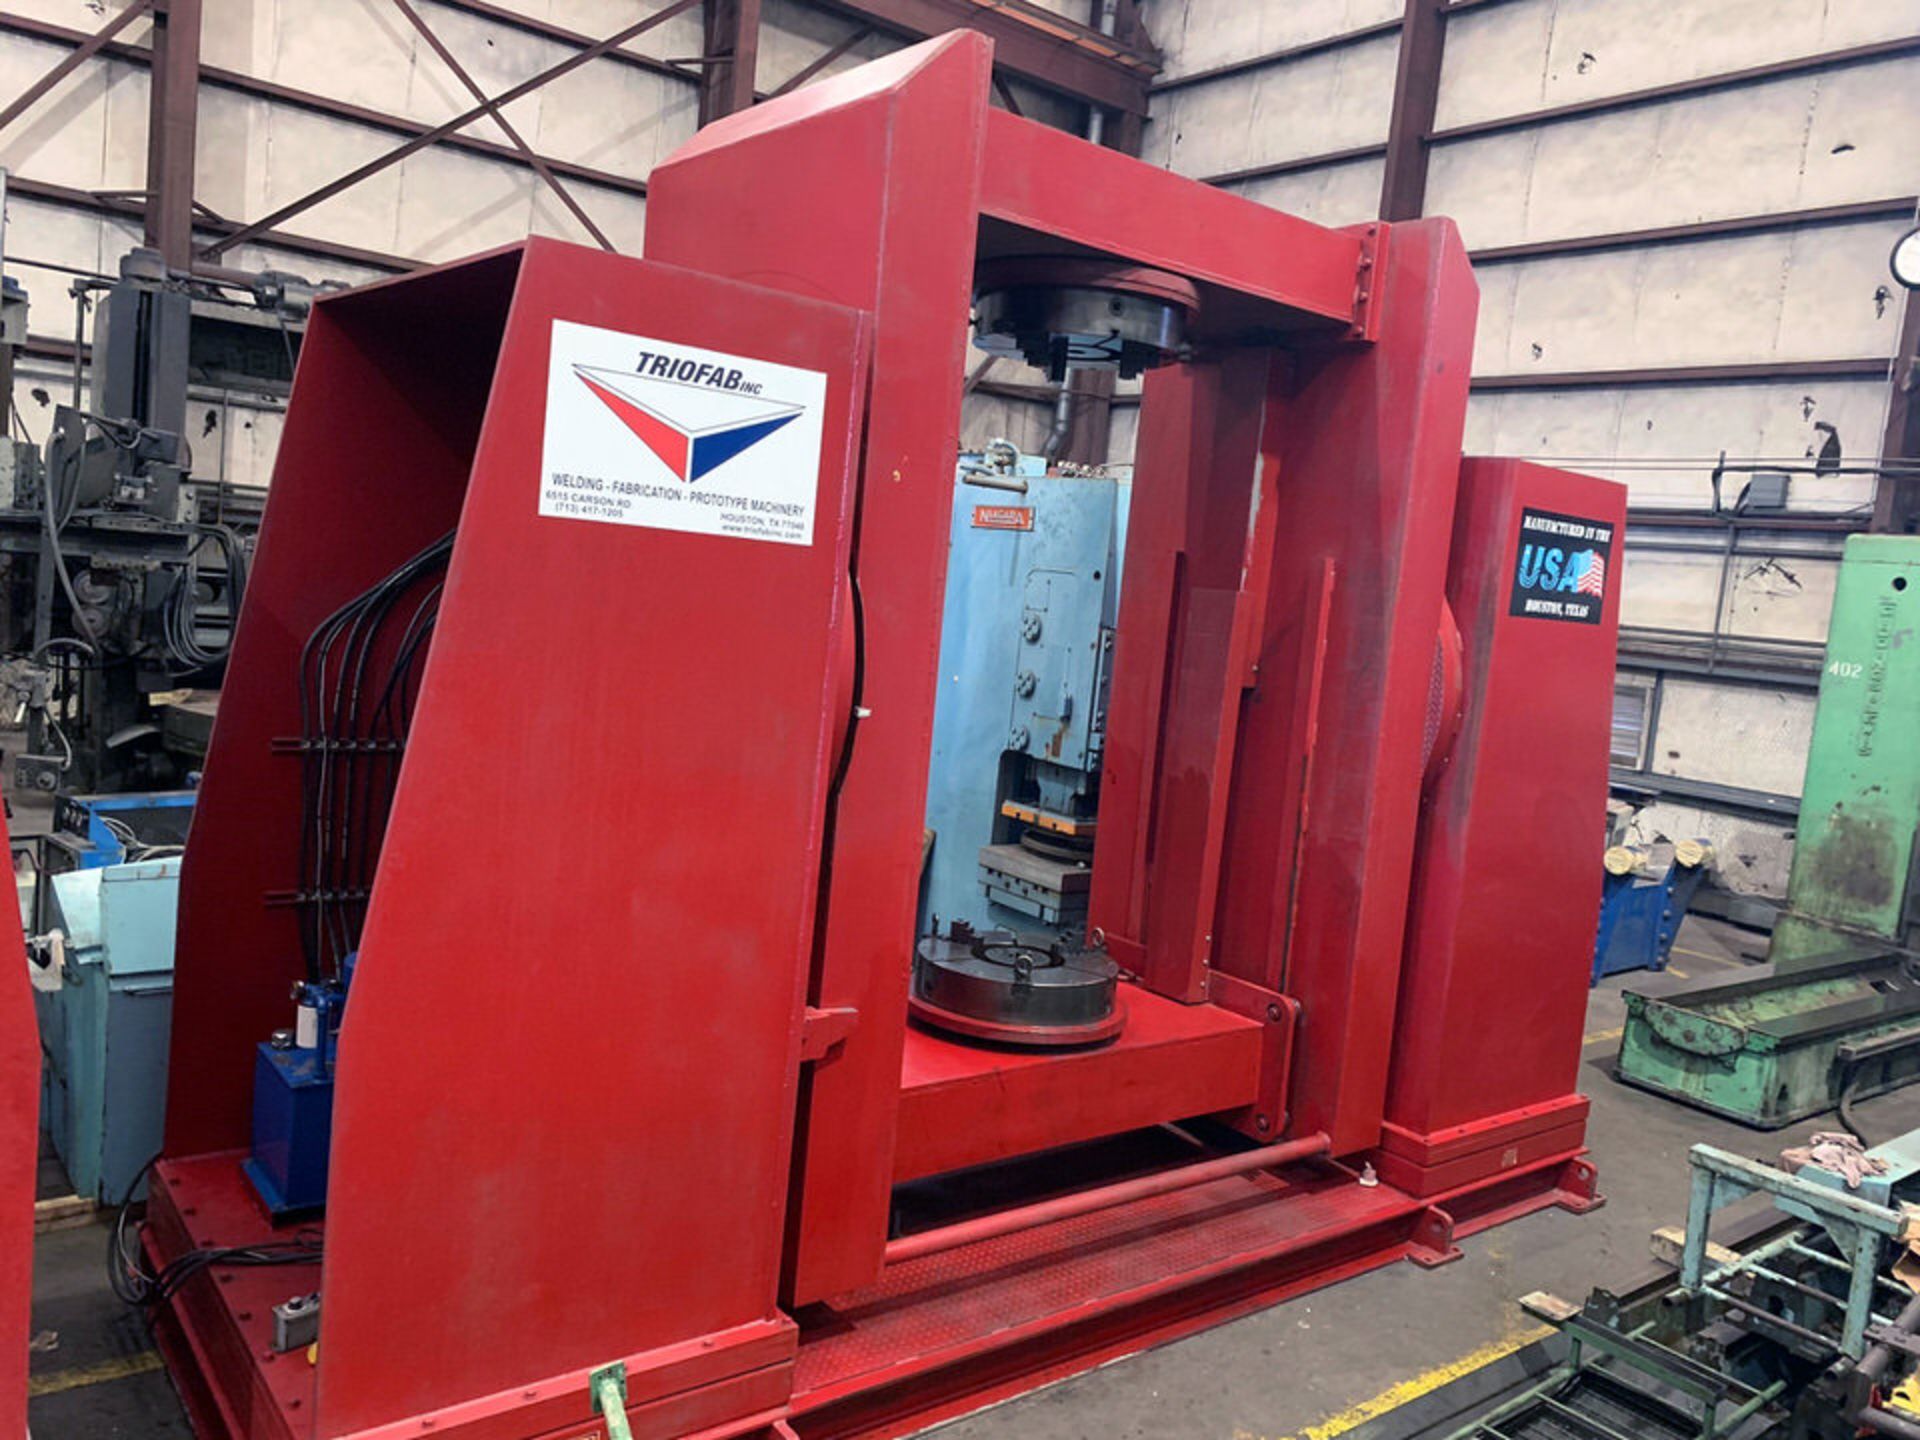 5 Ton Triofab Tilt and Rotate, Drop Center Vertical / Horizontal Head and Tailstock System Welding